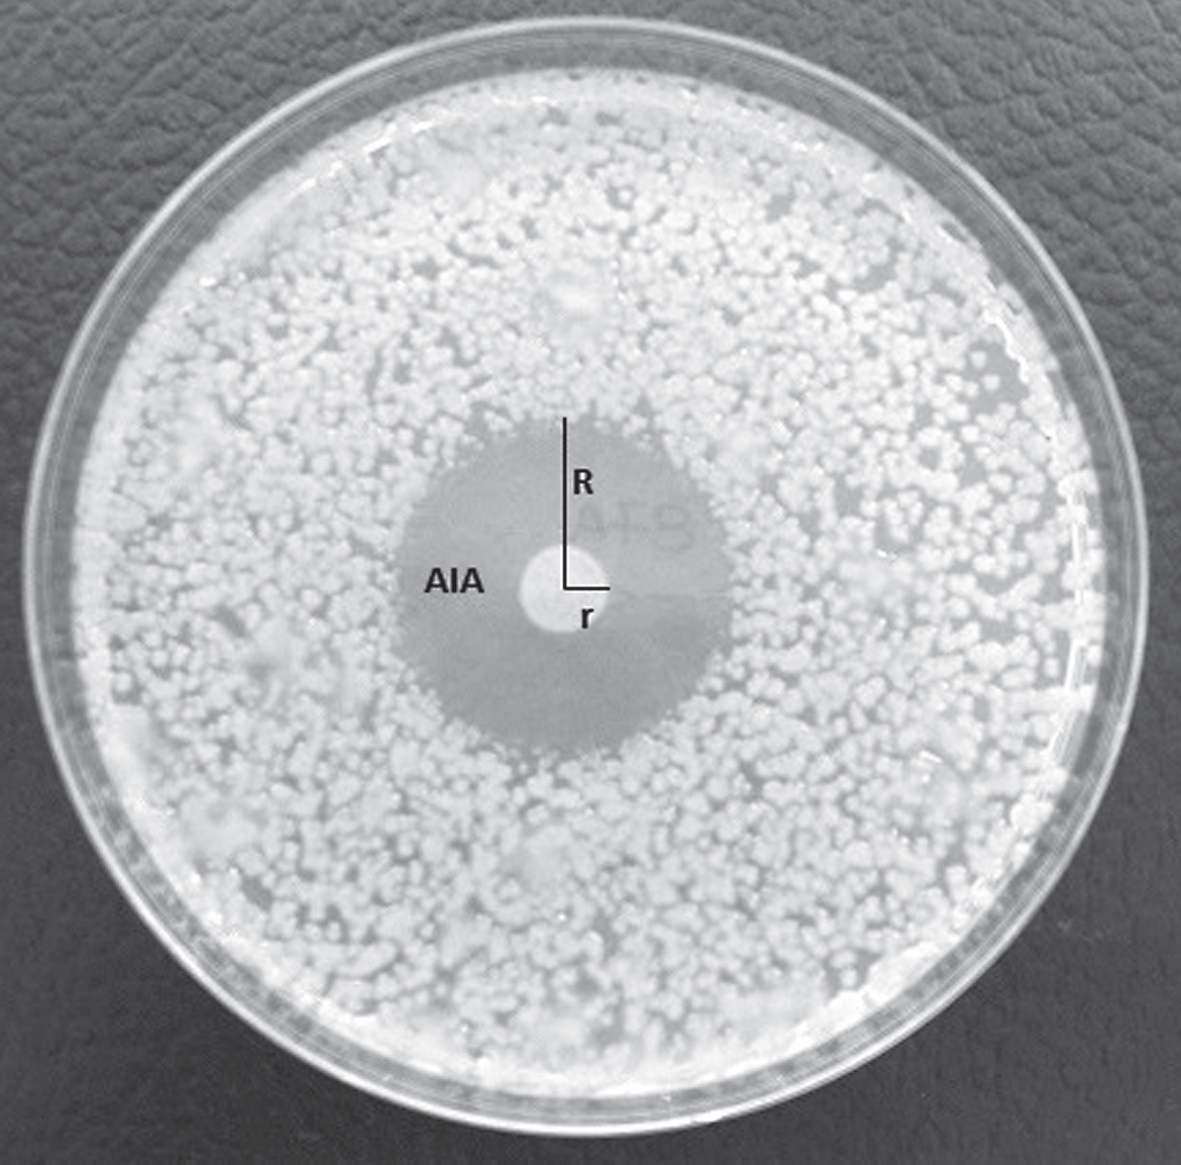 Inhibition halo developed around a macrocolony of Pseudomonas synxantha in a plate inoculated with the phytopathogenic bacterium Pseudomonas syringae pv. actinidiae. The inhibition halo was calculated as the result of following equation: AIA = (R2*3.14) – (r2*3.14).